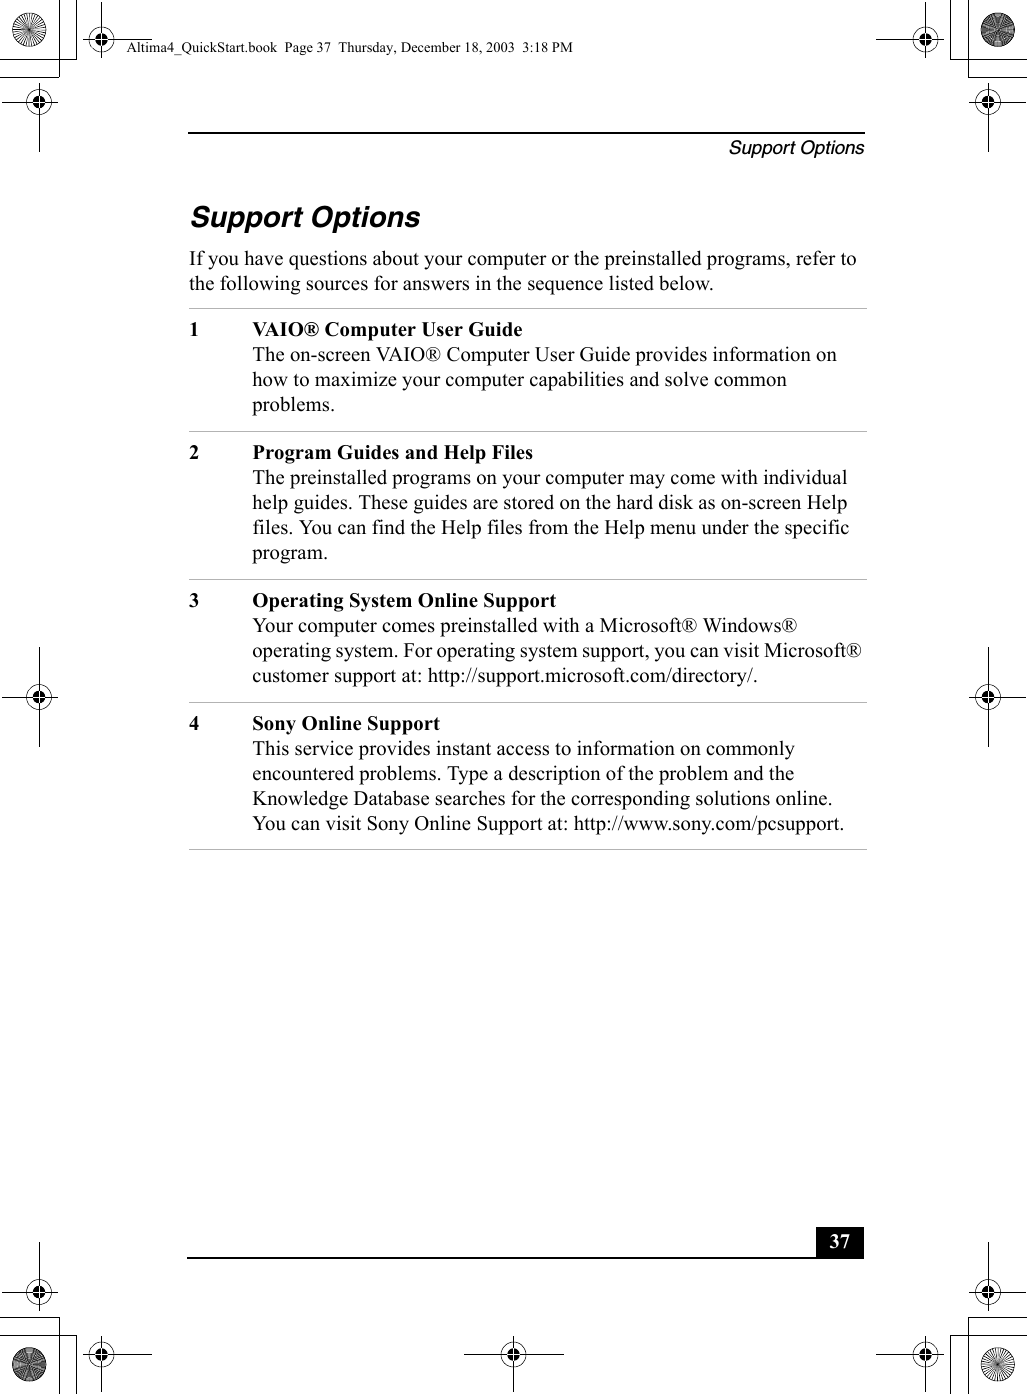 Support Options37Support OptionsIf you have questions about your computer or the preinstalled programs, refer to the following sources for answers in the sequence listed below.1 VAIO® Computer User GuideThe on-screen VAIO® Computer User Guide provides information on how to maximize your computer capabilities and solve common problems.2 Program Guides and Help FilesThe preinstalled programs on your computer may come with individual help guides. These guides are stored on the hard disk as on-screen Help files. You can find the Help files from the Help menu under the specific program. 3 Operating System Online SupportYour computer comes preinstalled with a Microsoft® Windows® operating system. For operating system support, you can visit Microsoft® customer support at: http://support.microsoft.com/directory/.4 Sony Online SupportThis service provides instant access to information on commonly encountered problems. Type a description of the problem and the Knowledge Database searches for the corresponding solutions online. You can visit Sony Online Support at: http://www.sony.com/pcsupport.Altima4_QuickStart.book  Page 37  Thursday, December 18, 2003  3:18 PM